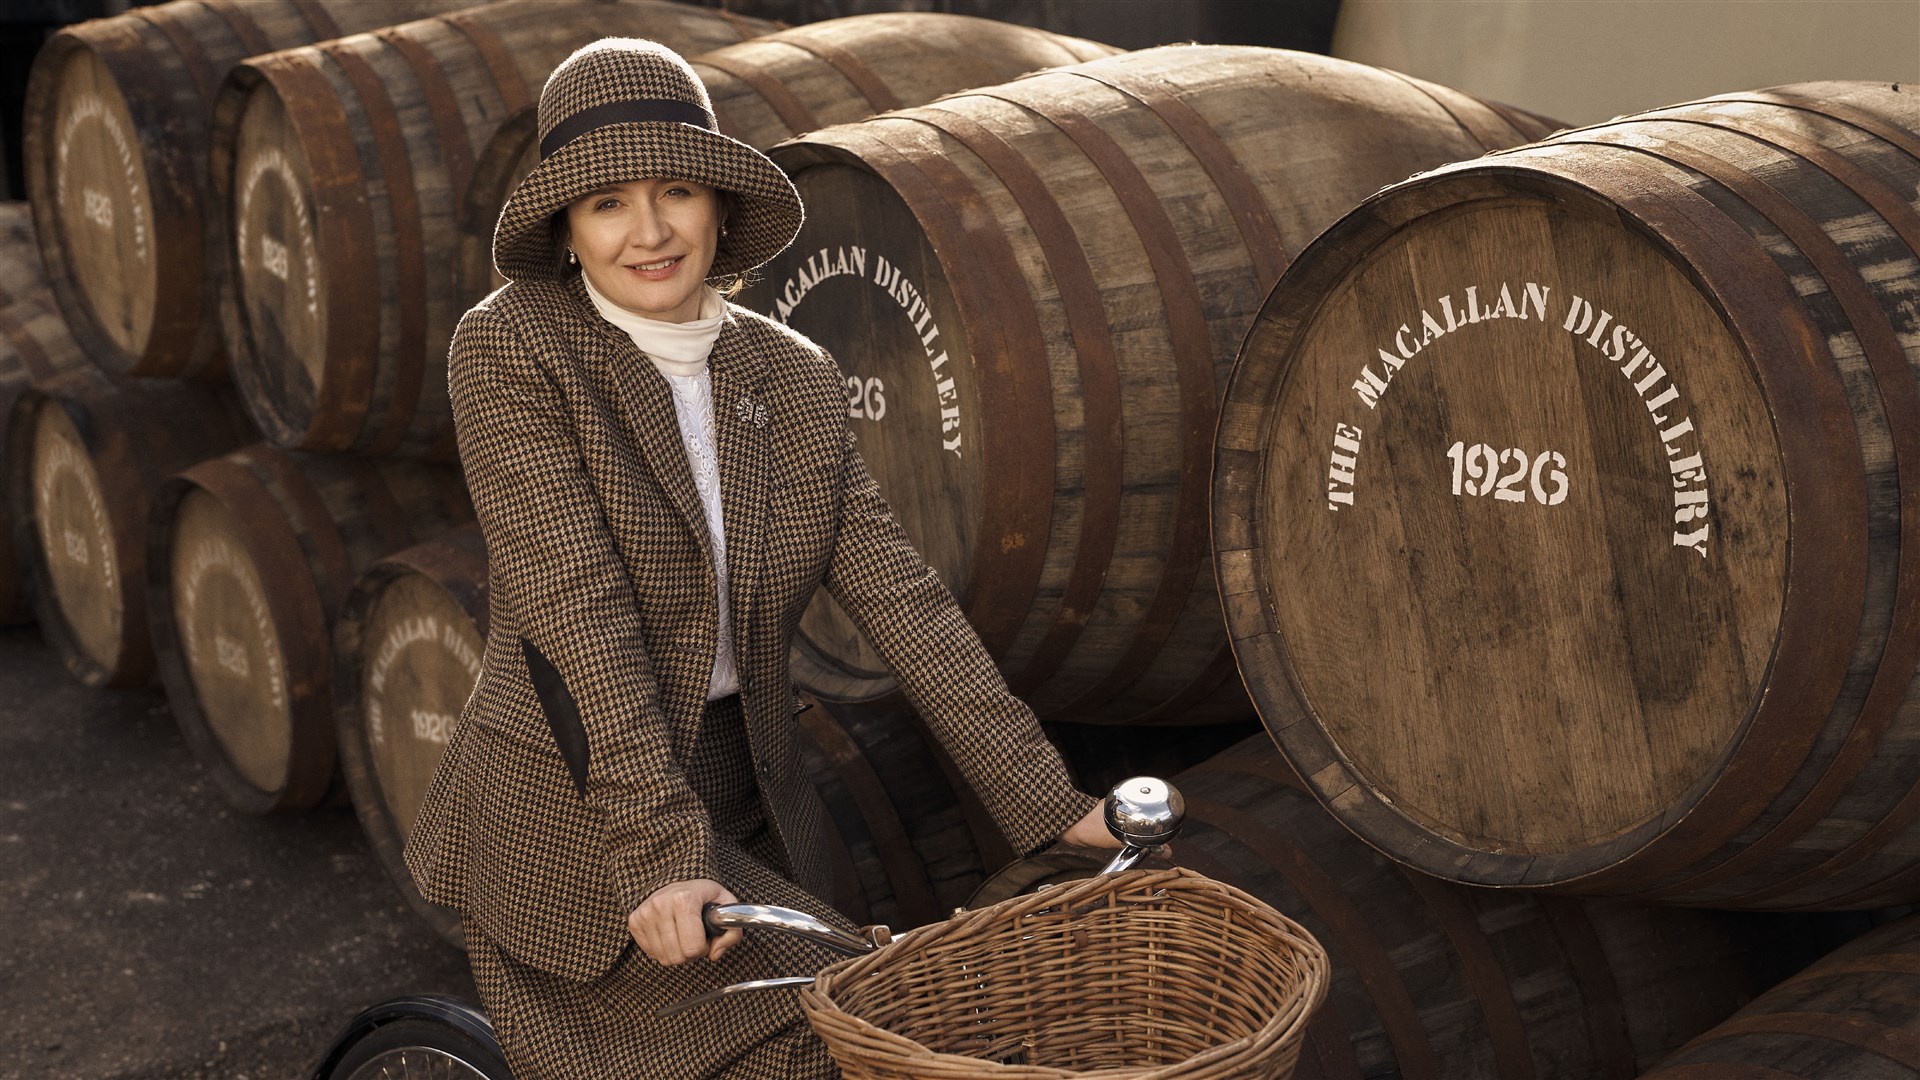 Emily Mortimer in the role of Janet Harbinson in The Spirit of 1926 film.